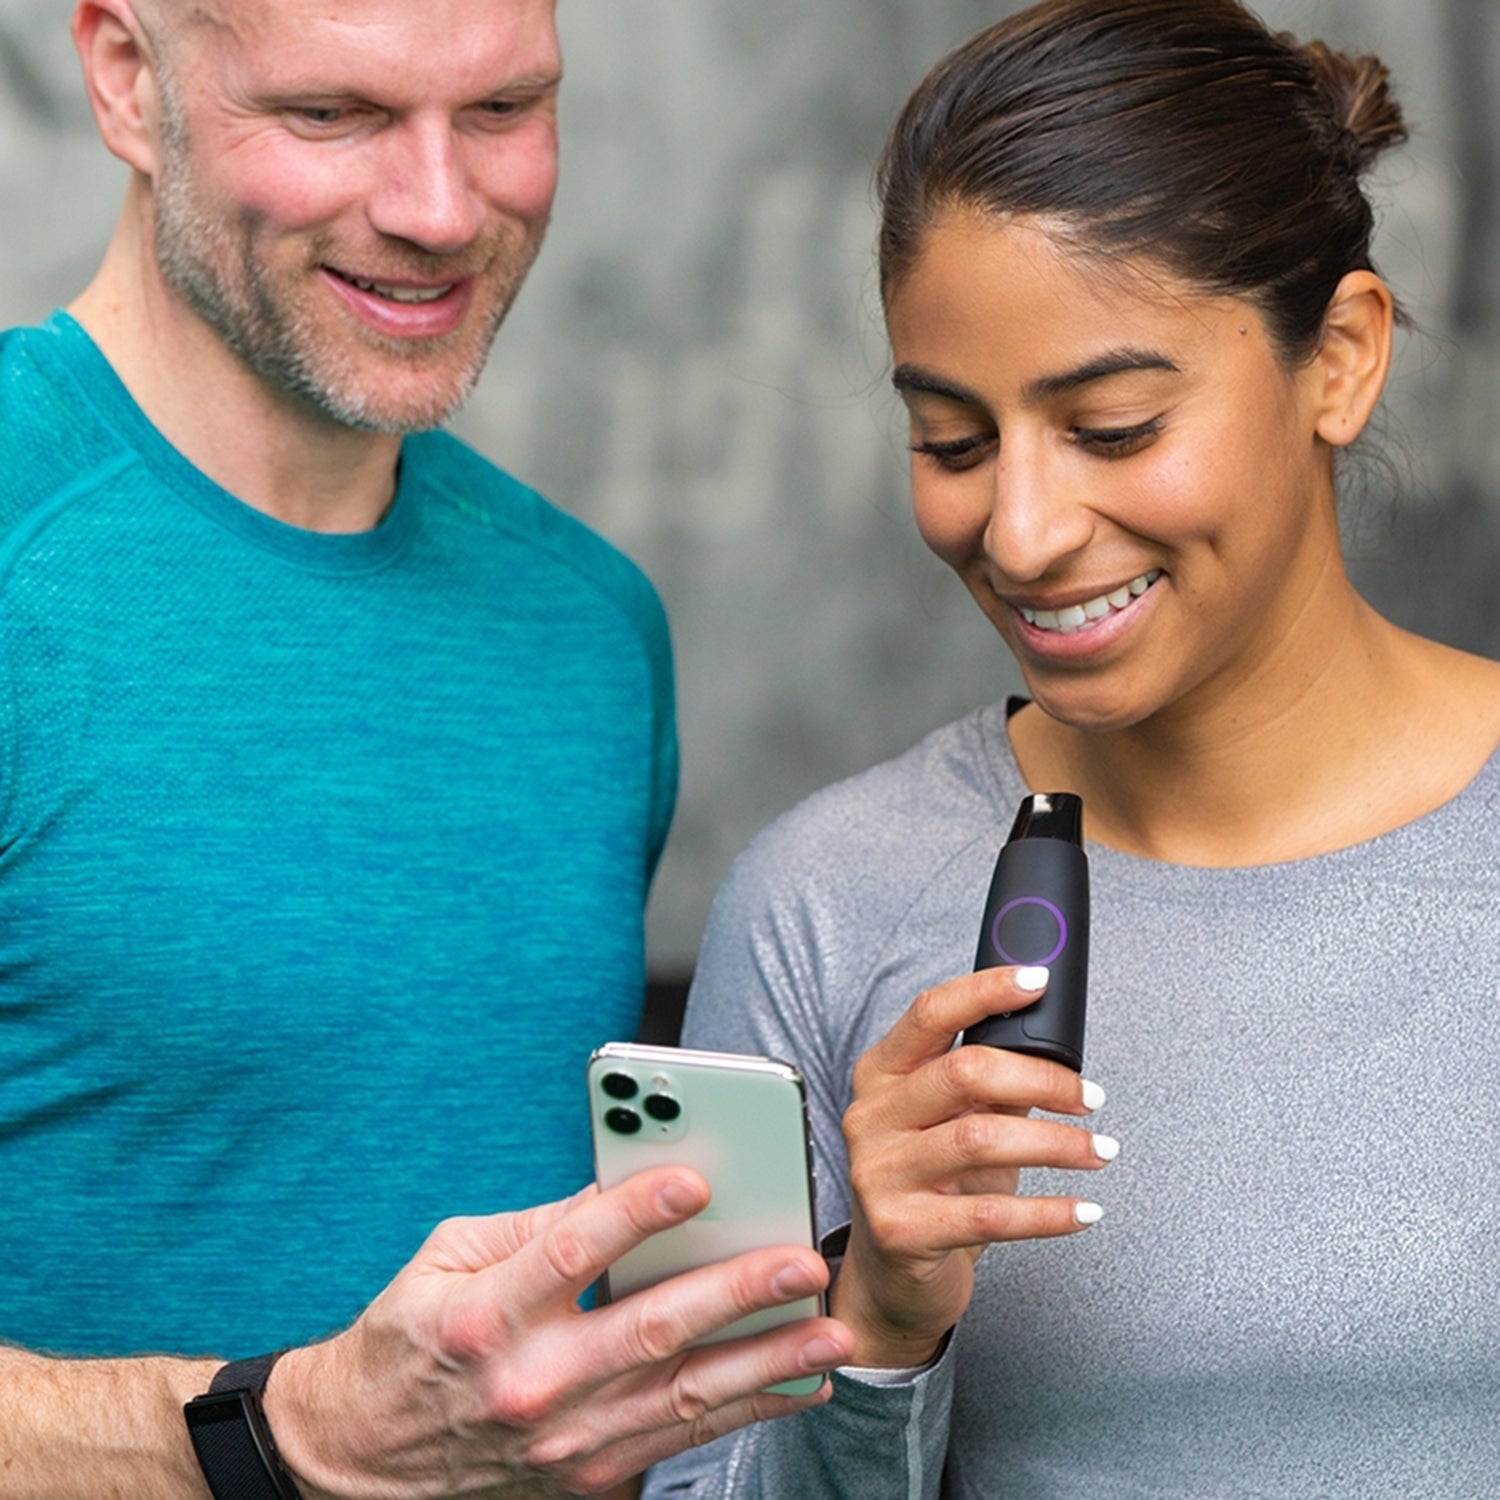 Digital health tracking tools help individuals lose weight, study finds, News Center